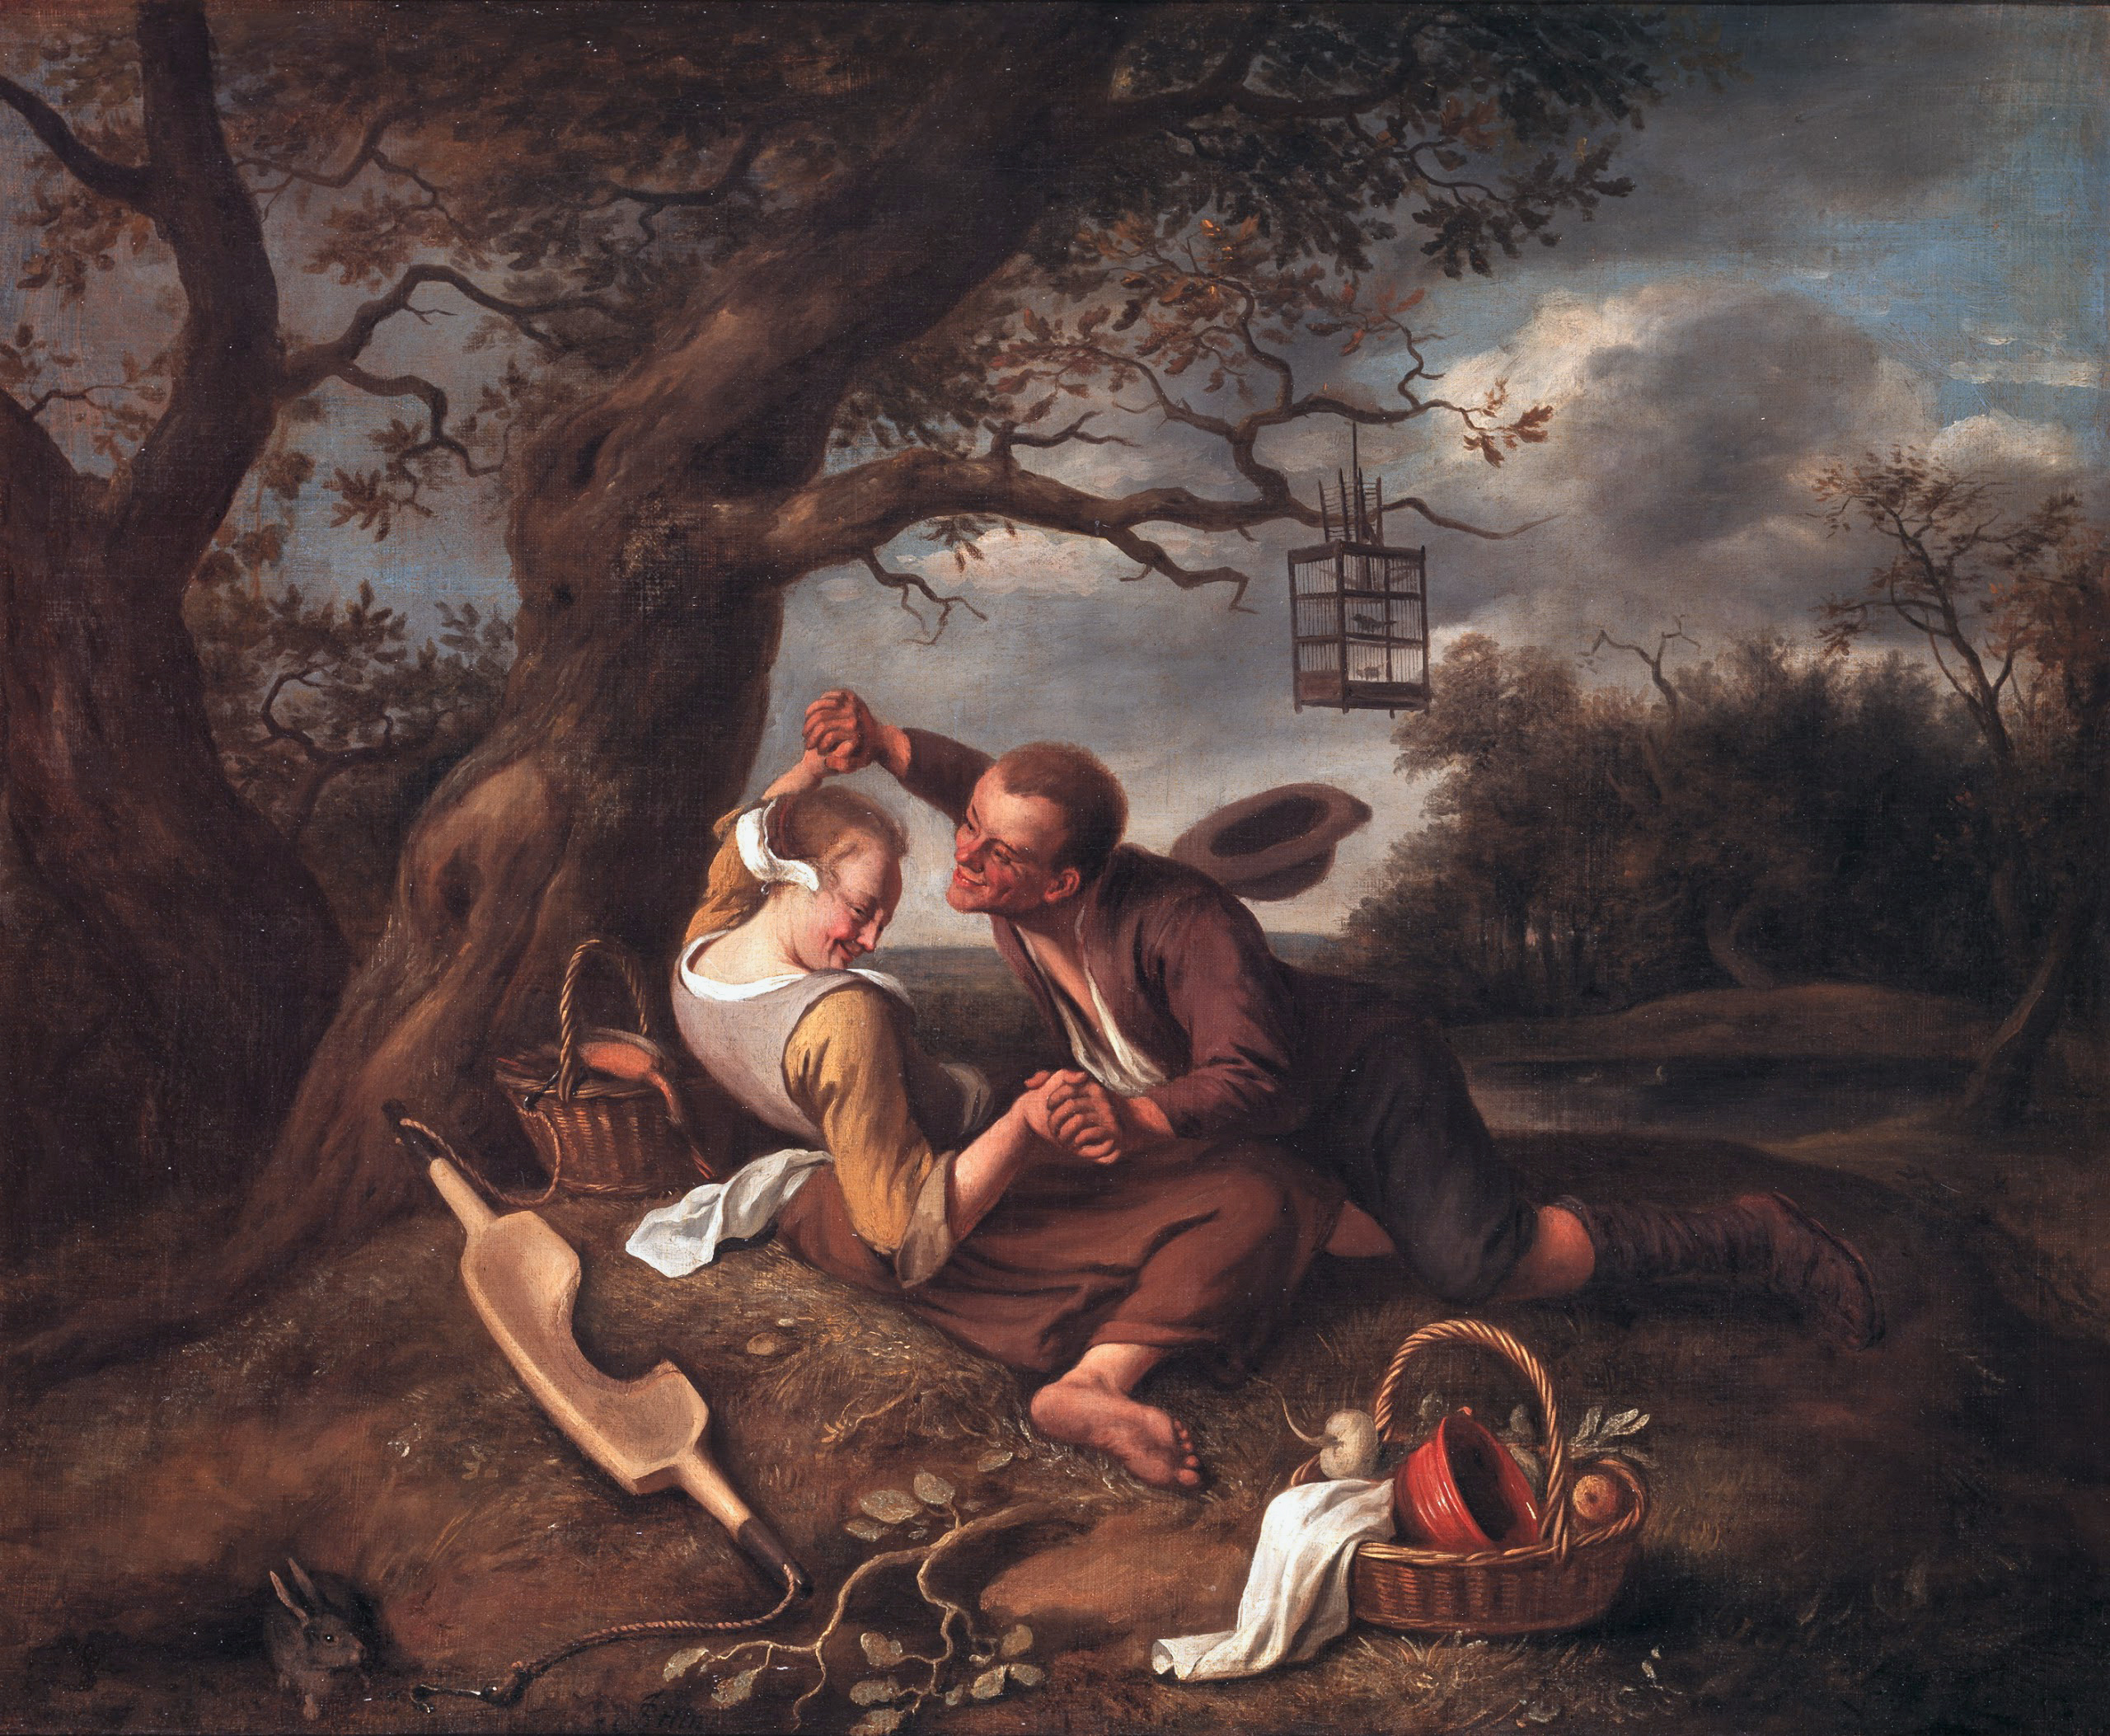 A merry couple, by Jan Steen